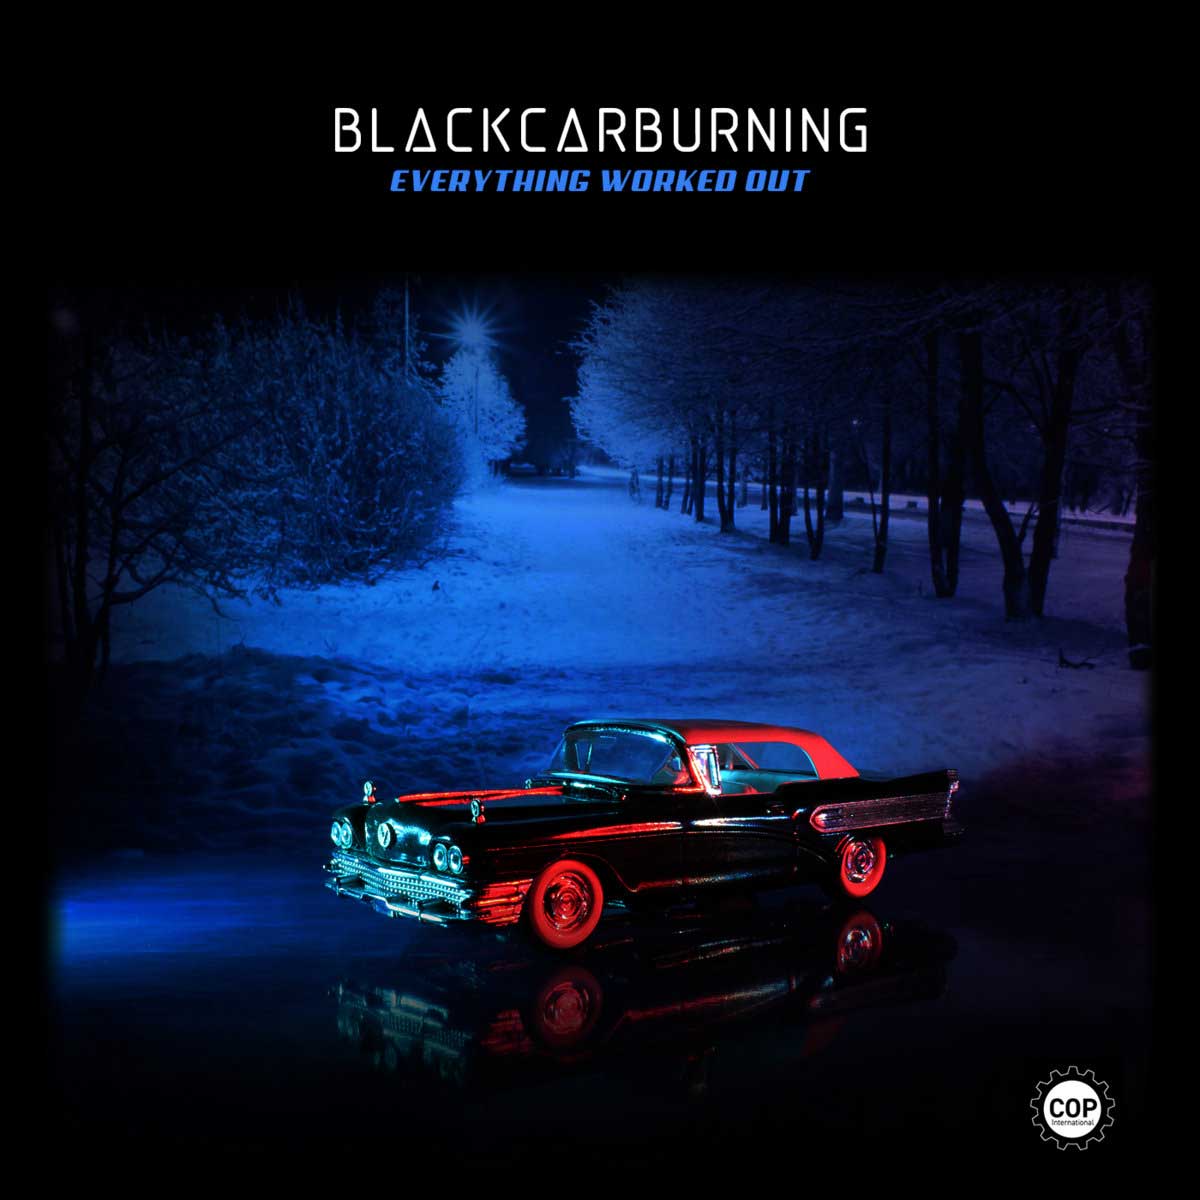 blackcarburning - Everything Worked Out - blackcarburning - Everything Worked Out